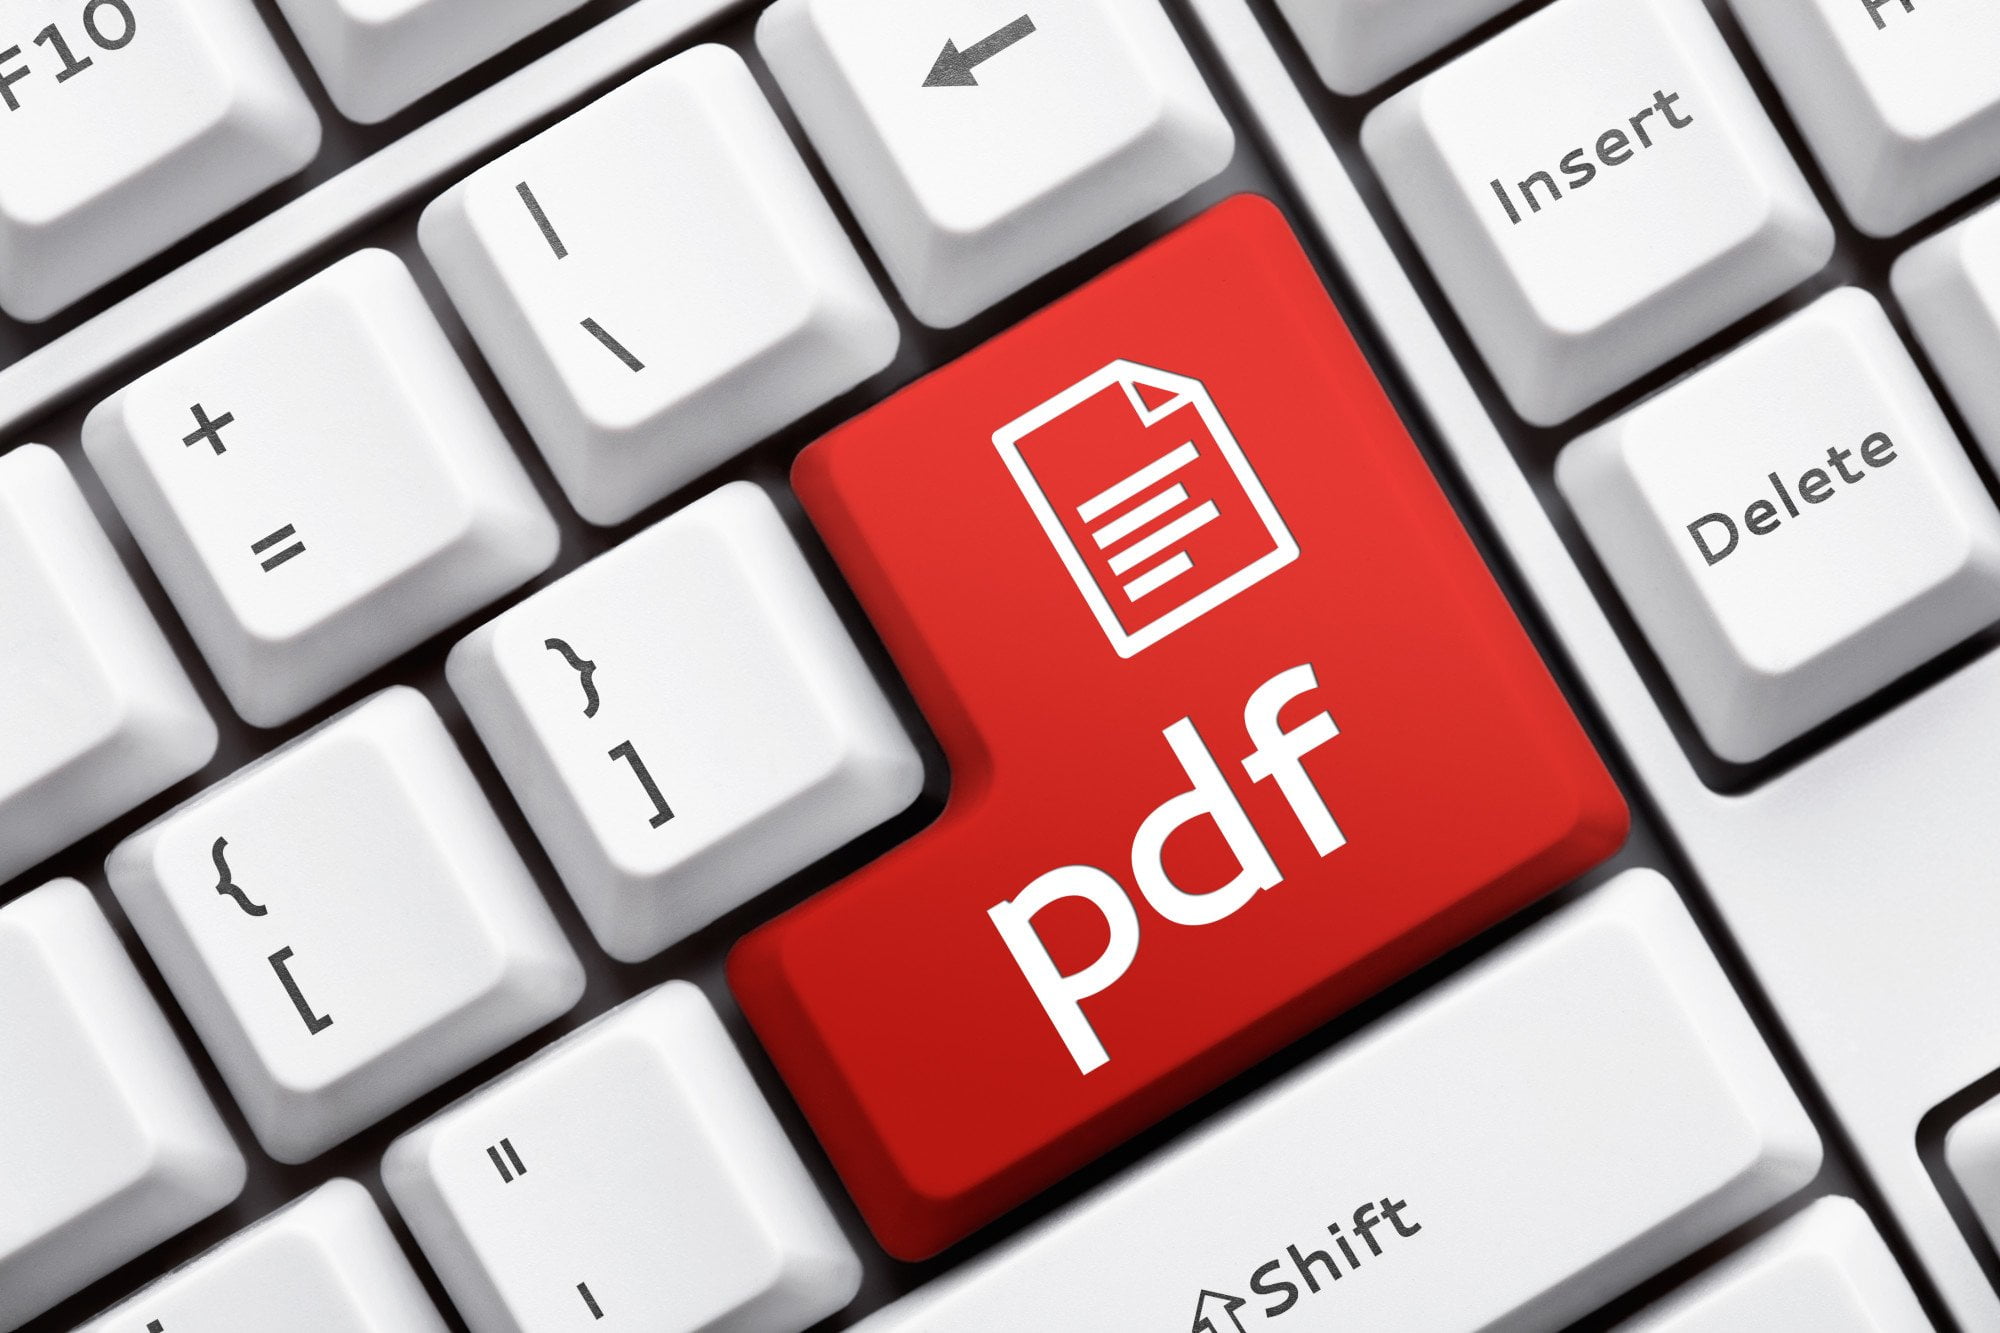 Different formats suit different file types and online applications. Get started understanding the intricacies of web files by comparing HTML vs PDF files.